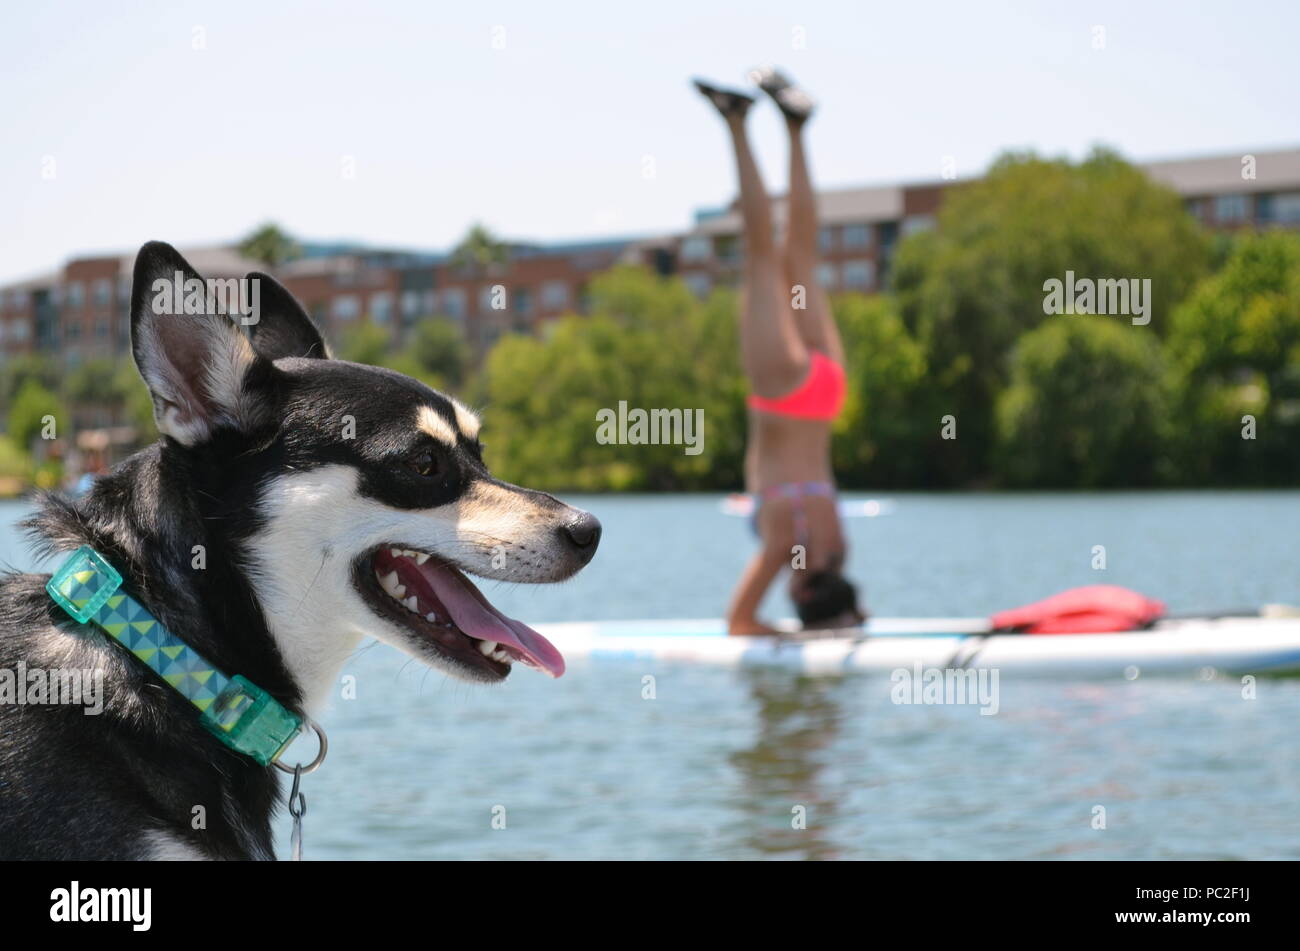 A dog seems unimpressed with a girl's headstand while paddle boarding. Stock Photo